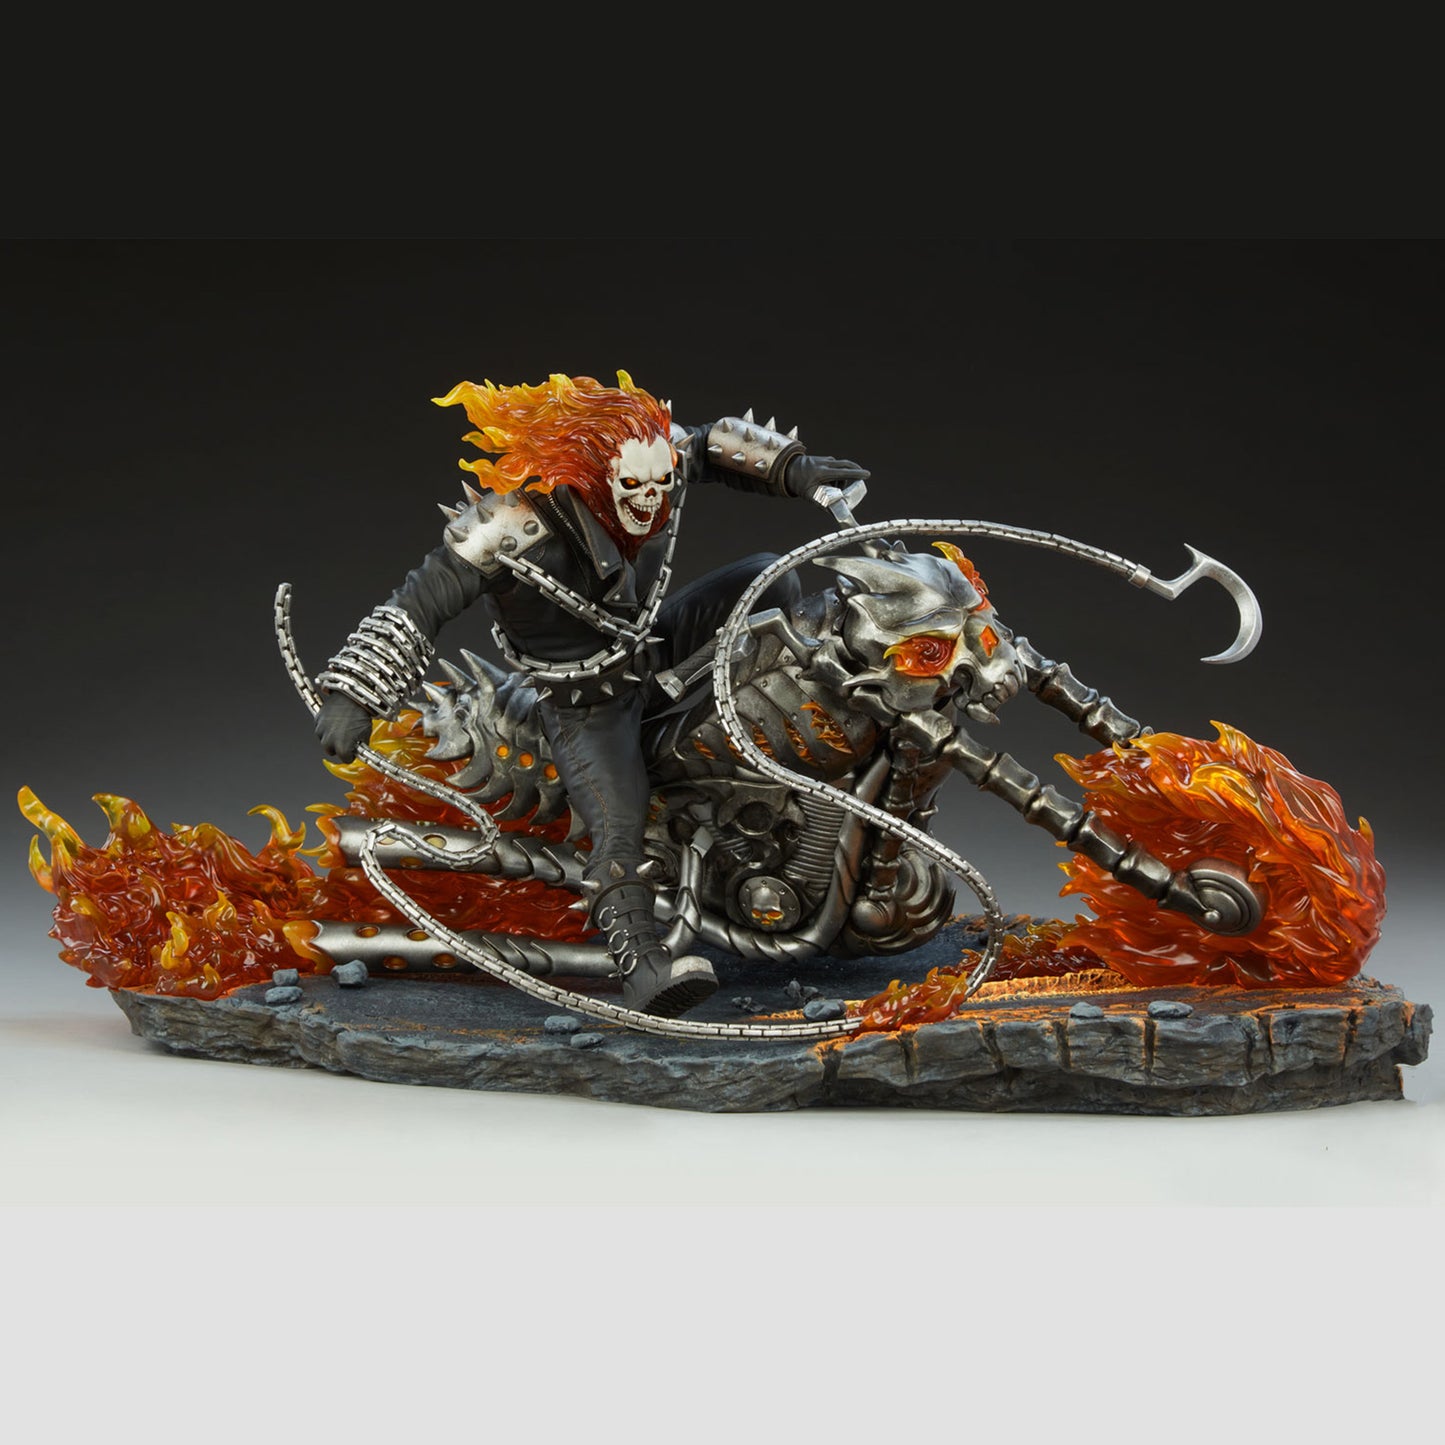 Ghost Rider (Contest of Champions) Gamerverse Marvel 1:6 Scale Statue